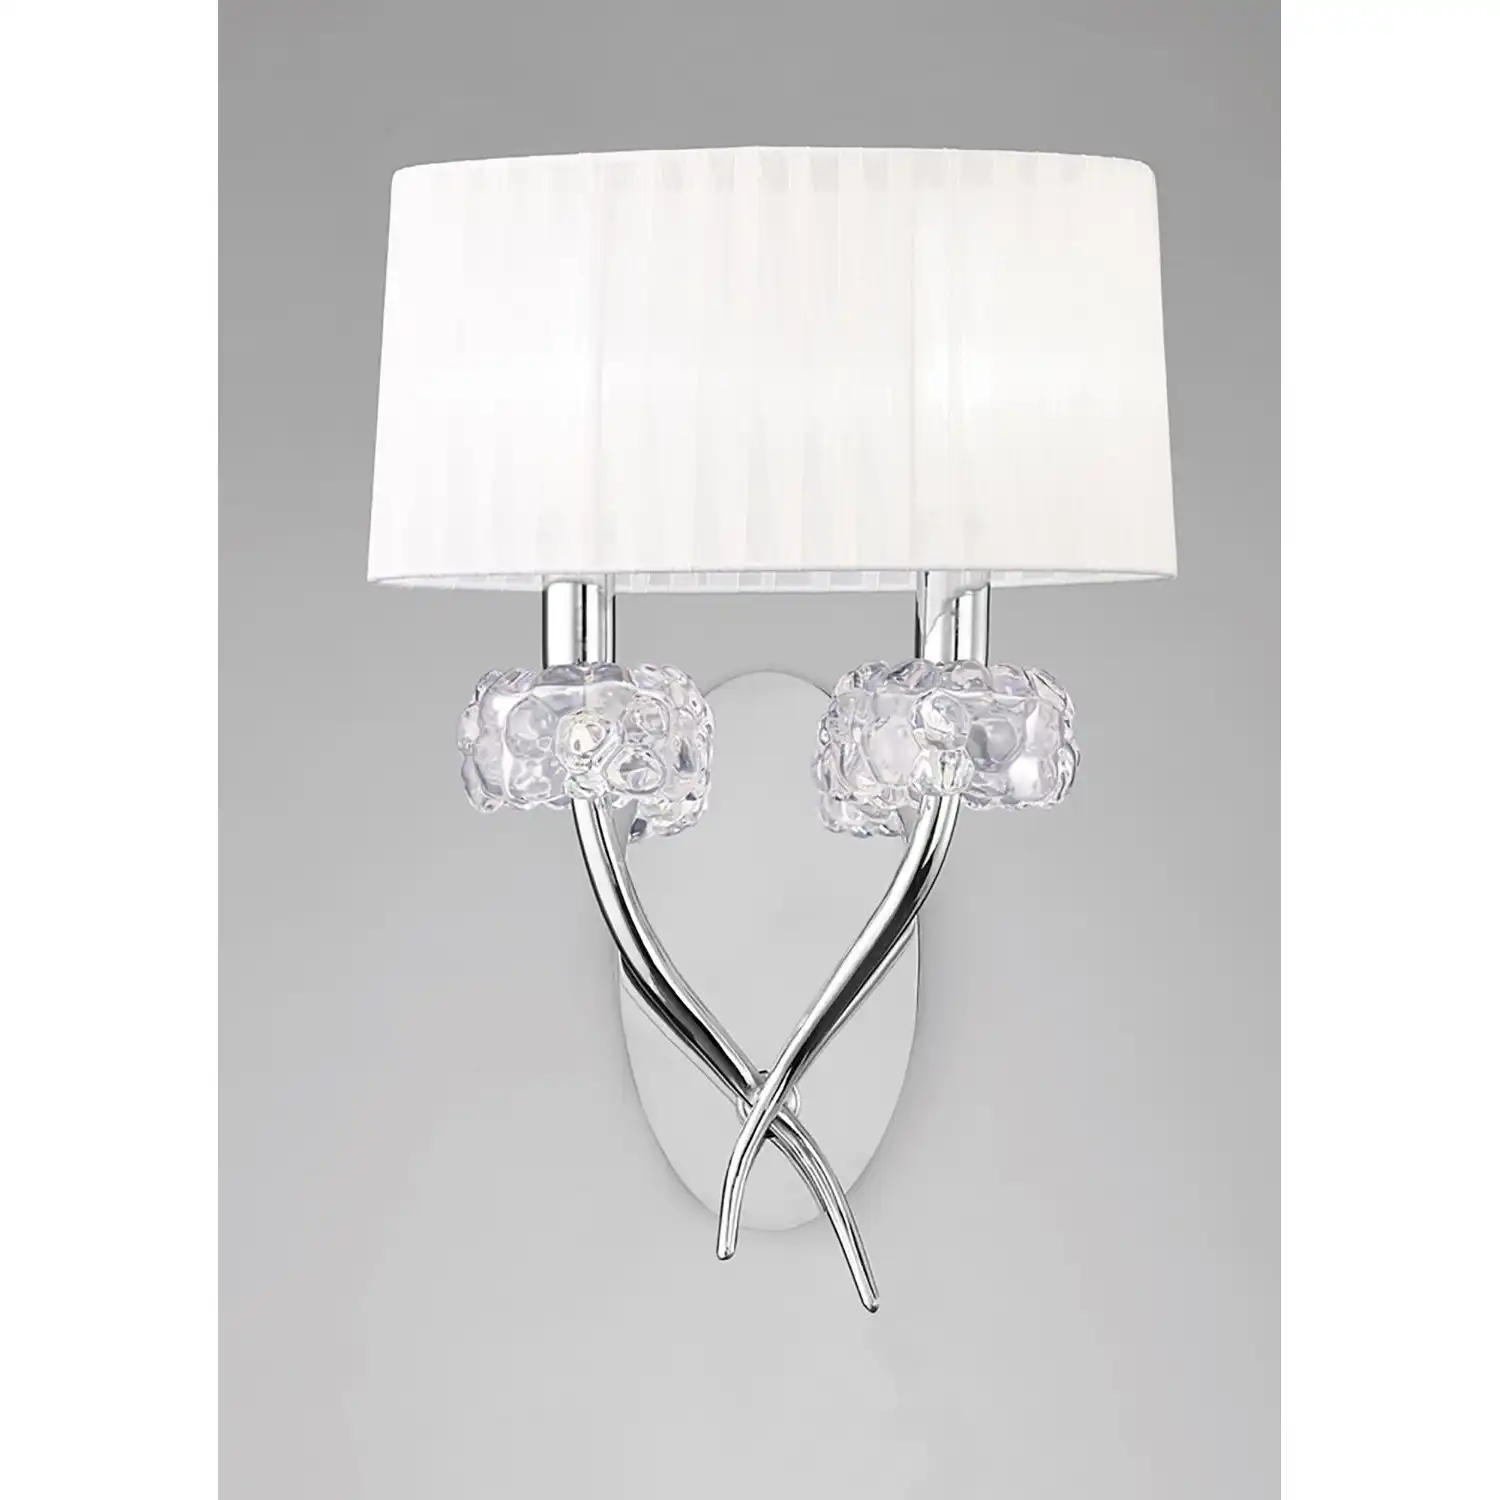 Loewe Wall Lamp Switched 2 Light E14, Polished Chrome With White Shade